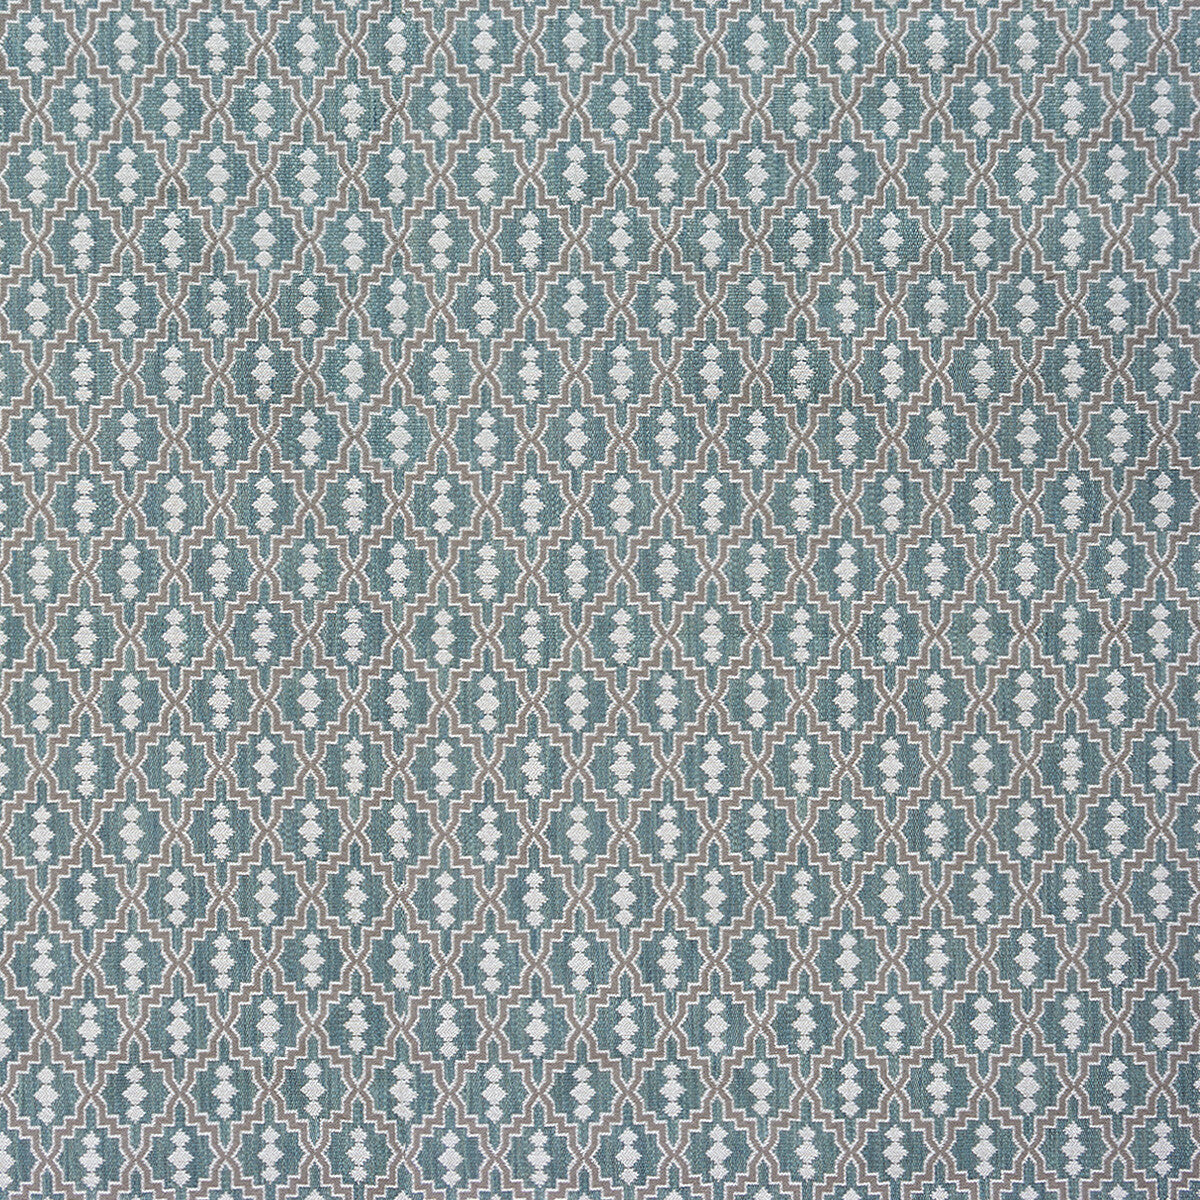 Aztec fabric in agua color - pattern GDT5152.010.0 - by Gaston y Daniela in the Gaston Rio Grande collection